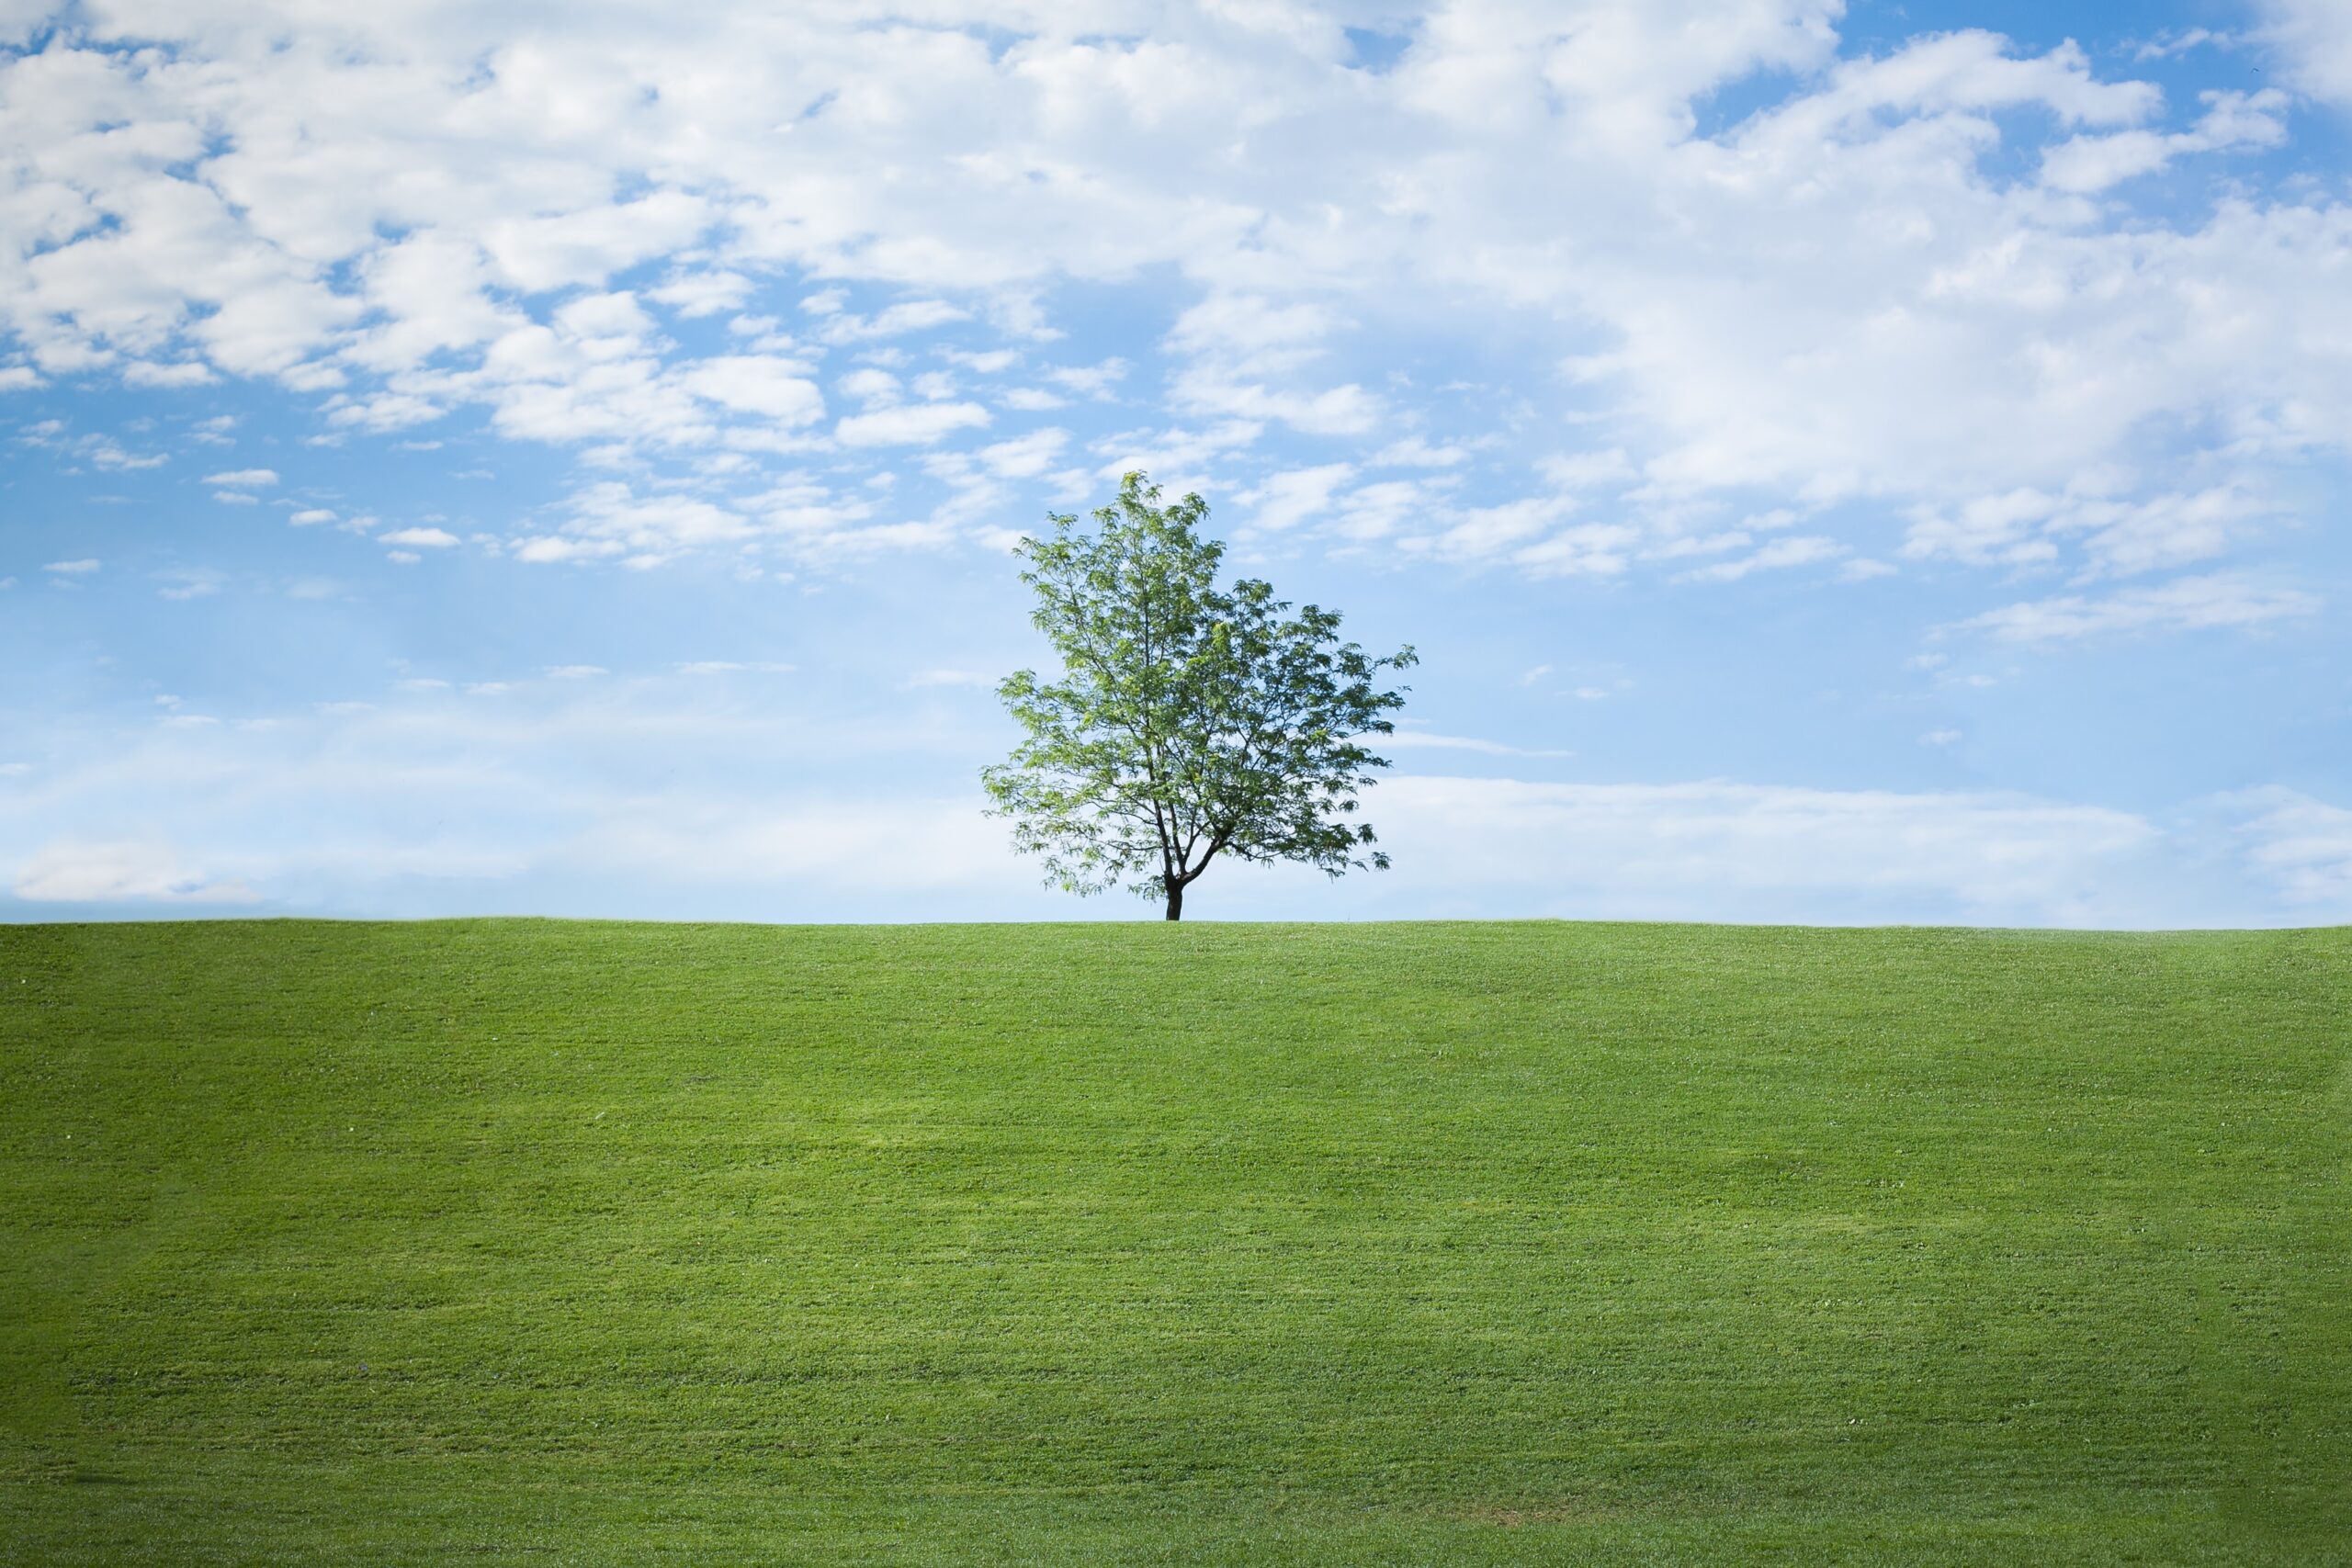 small tree shown far away in bright green field with blue sky and clouds